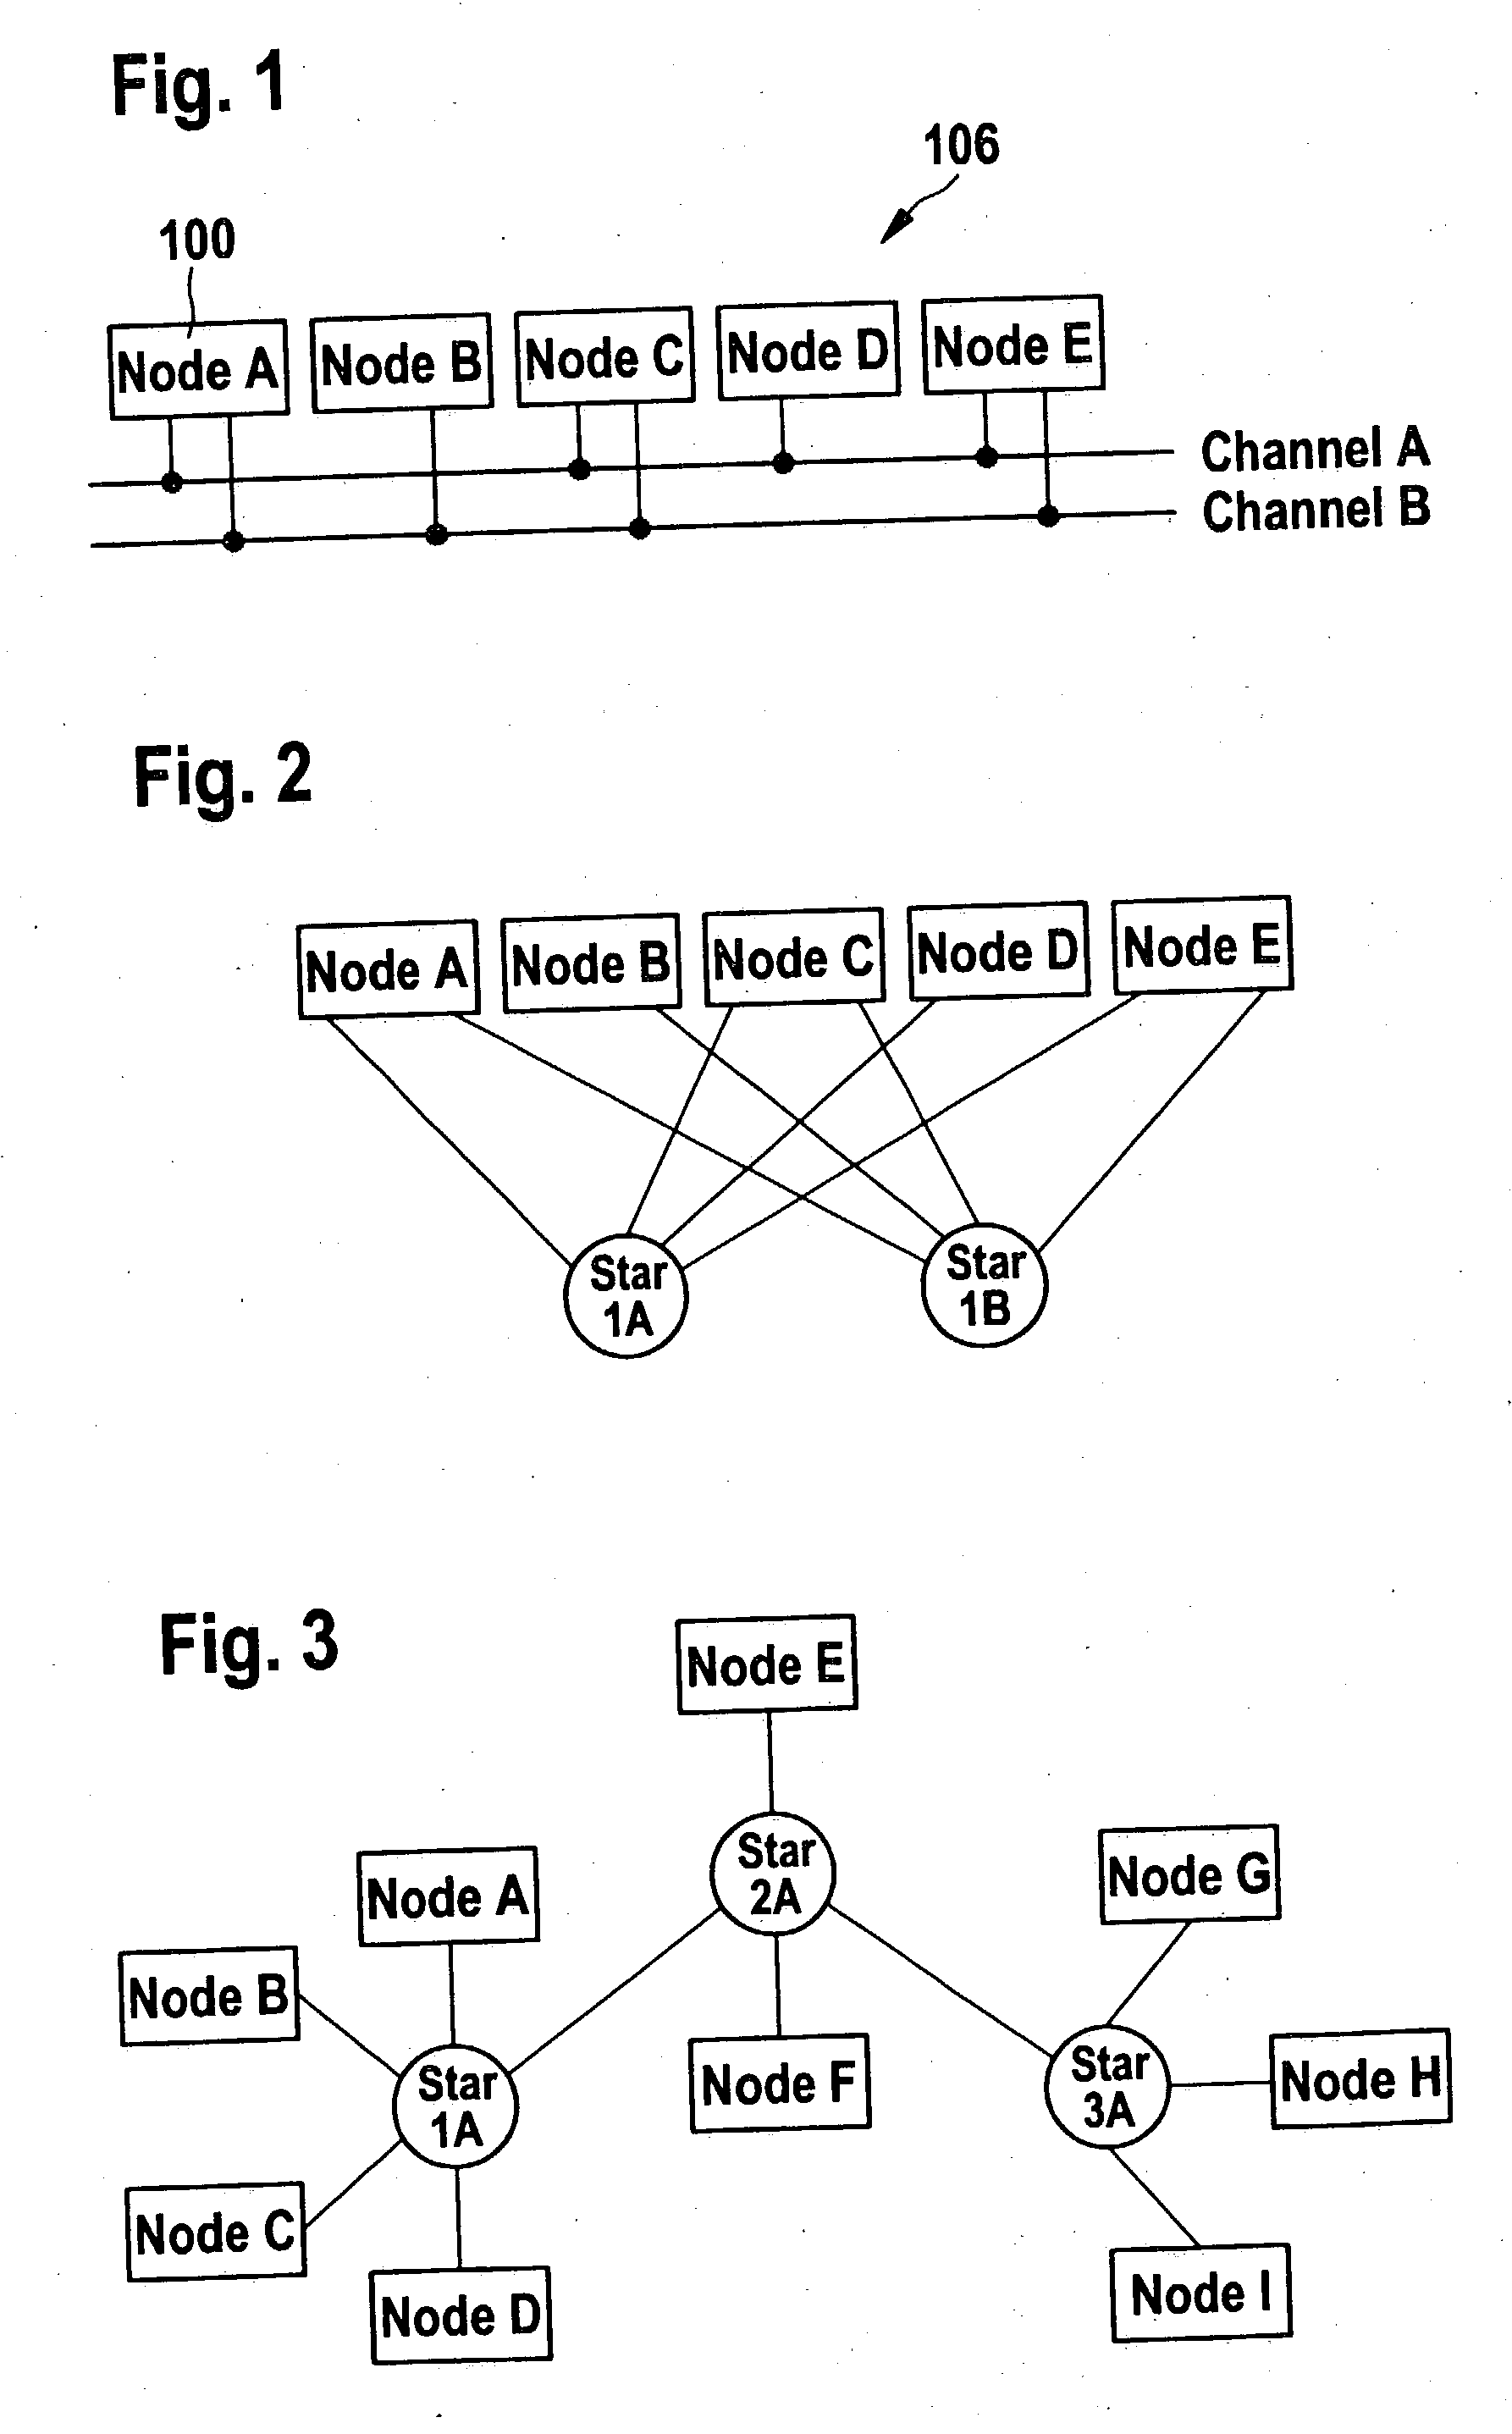 Method for synchronizing clocks in a distributed communication system